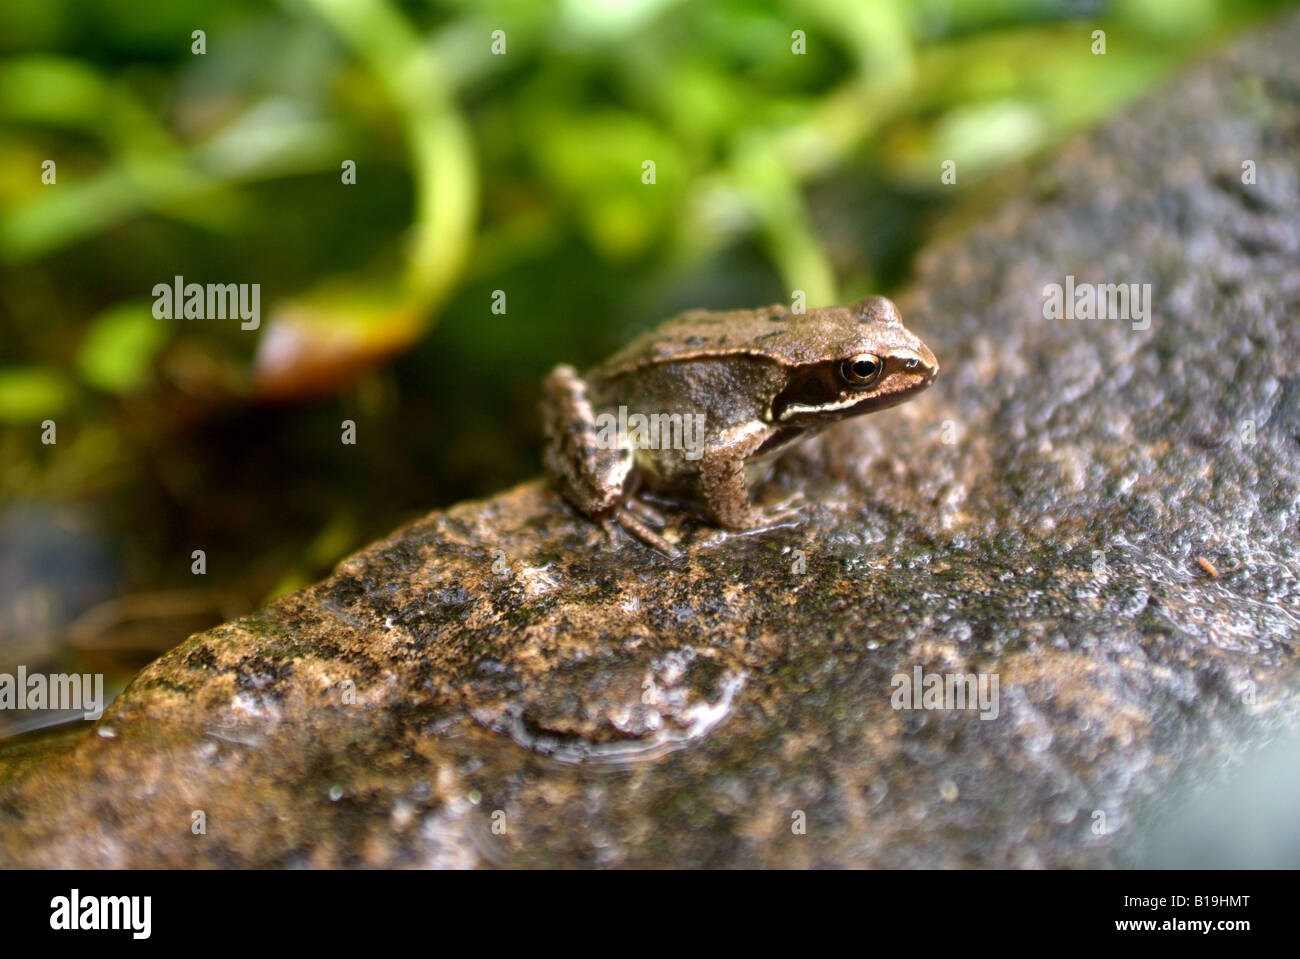 A Common Frog, Rana temporaria, sitting on a stone in a garden. Stock Photo